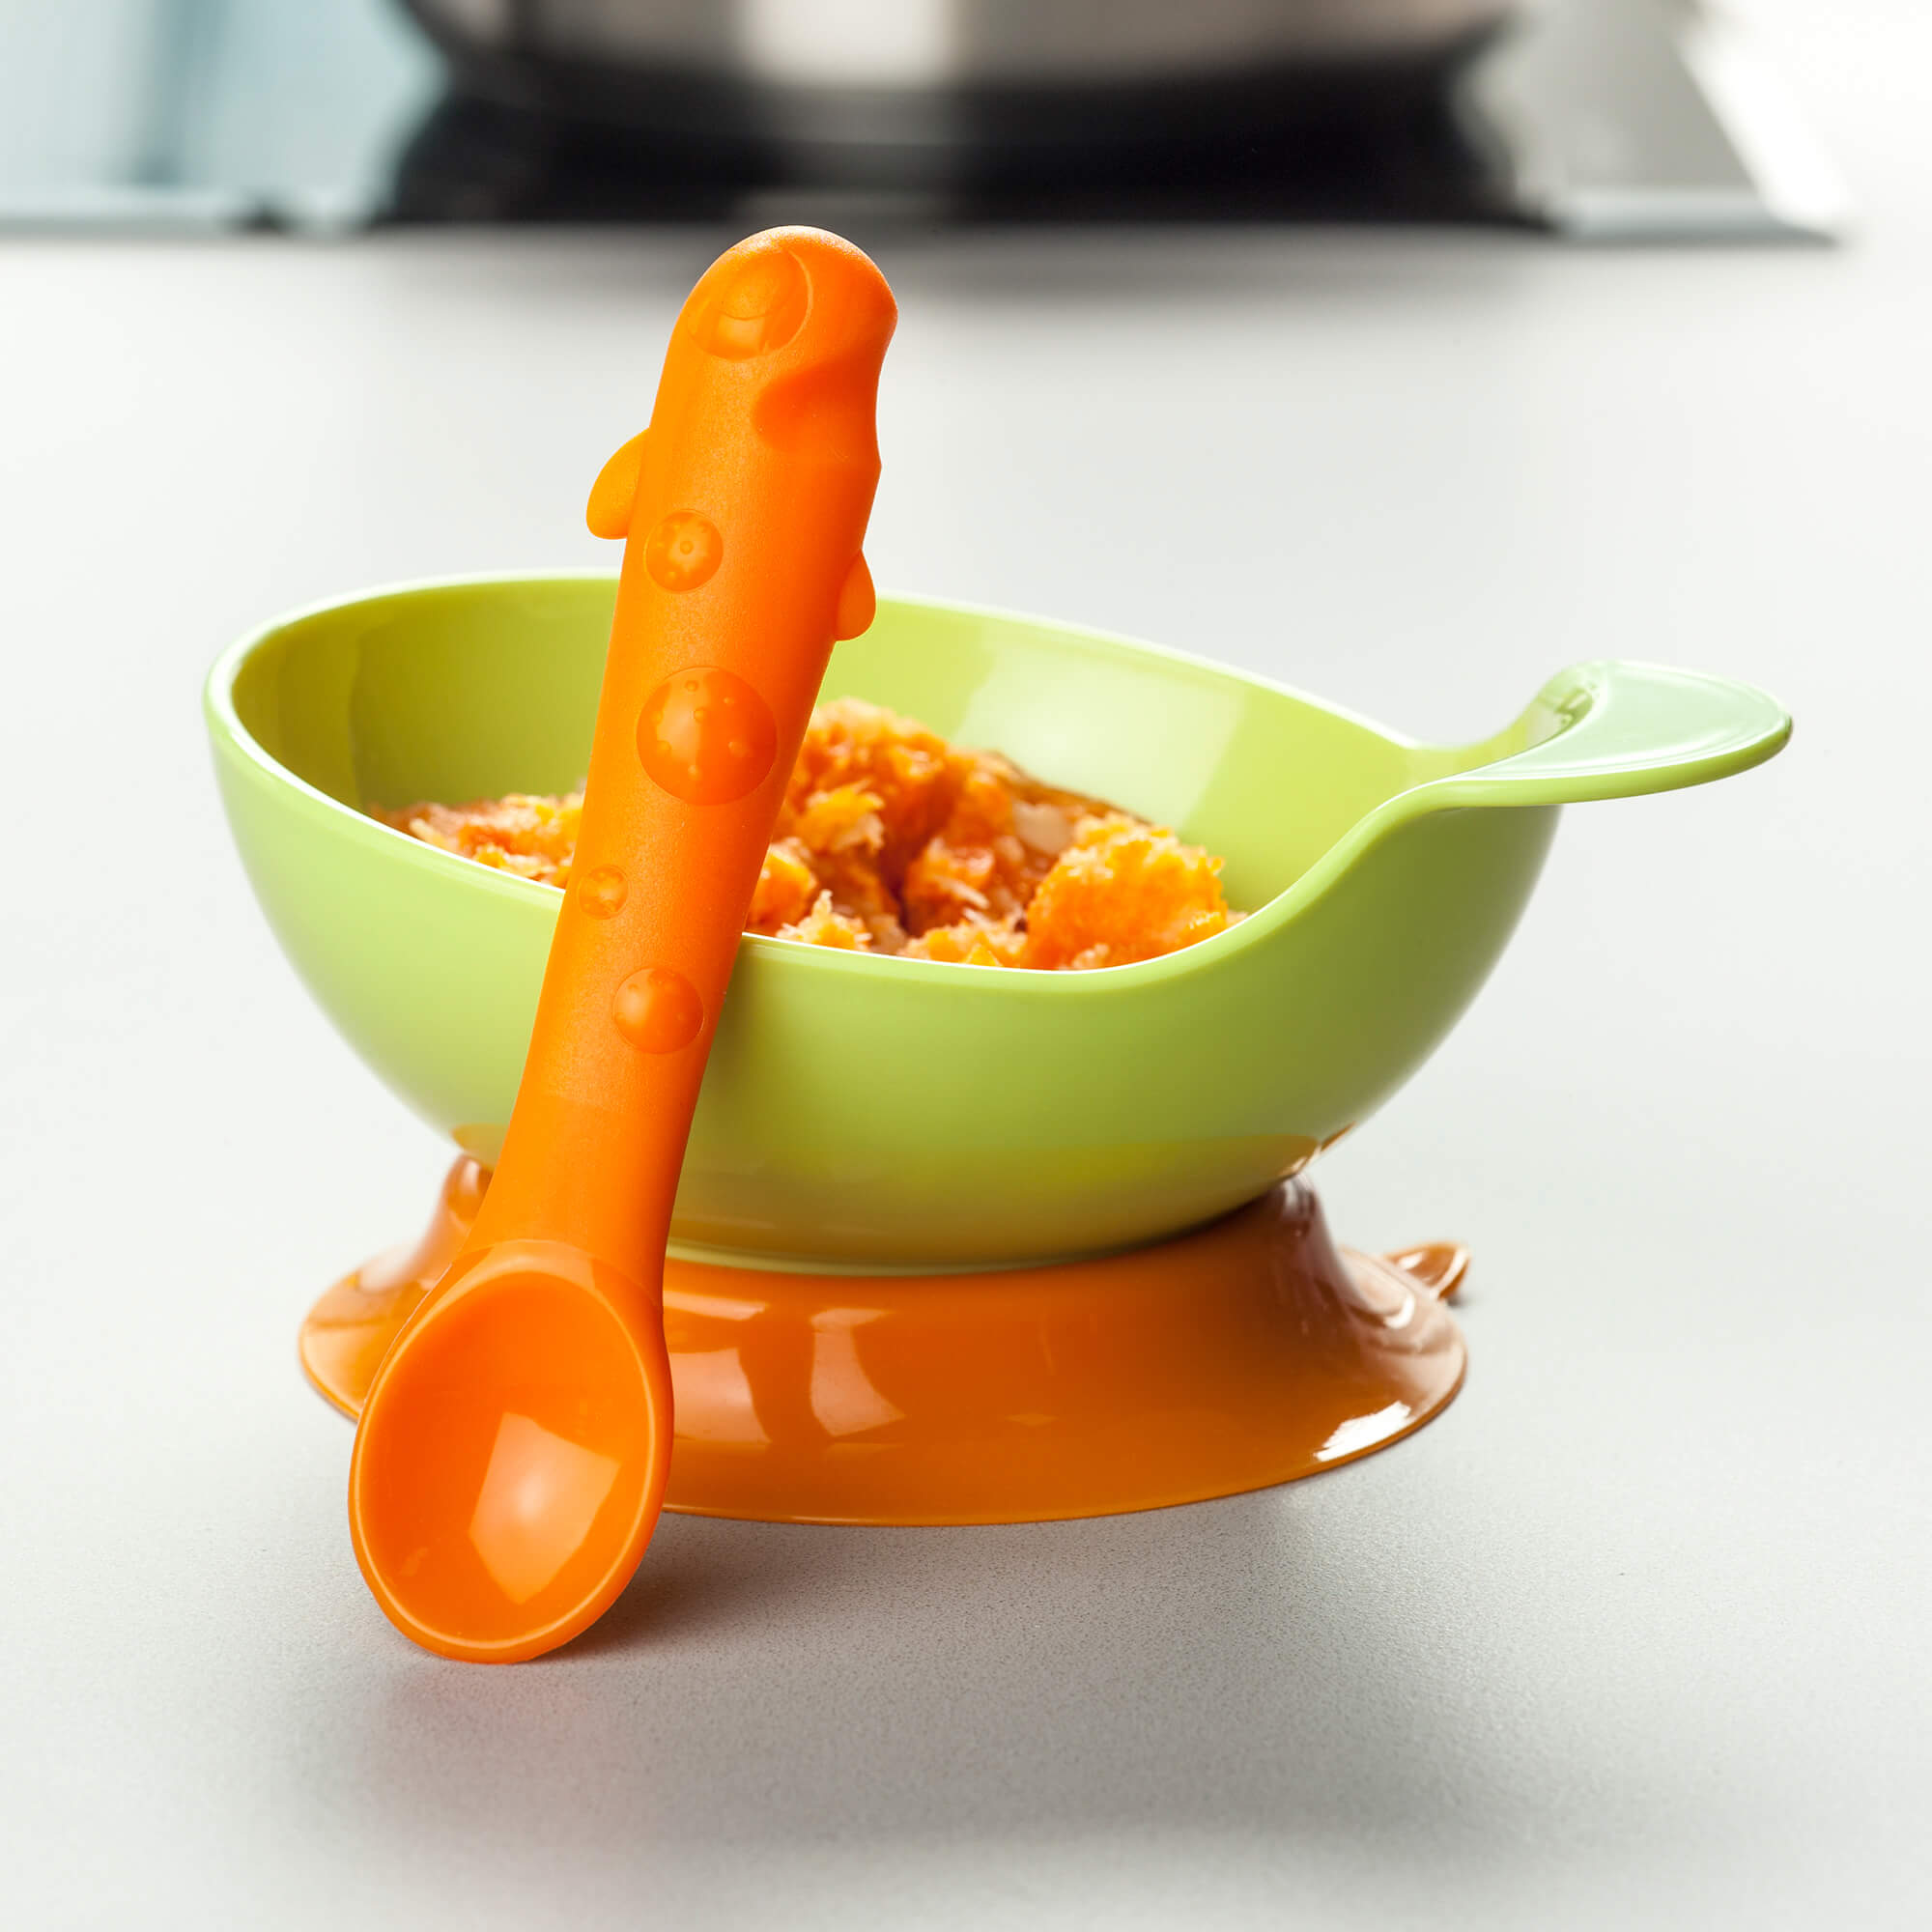 Zeal Silicone Baby Bowl and Spoon Set in Lime and Orange